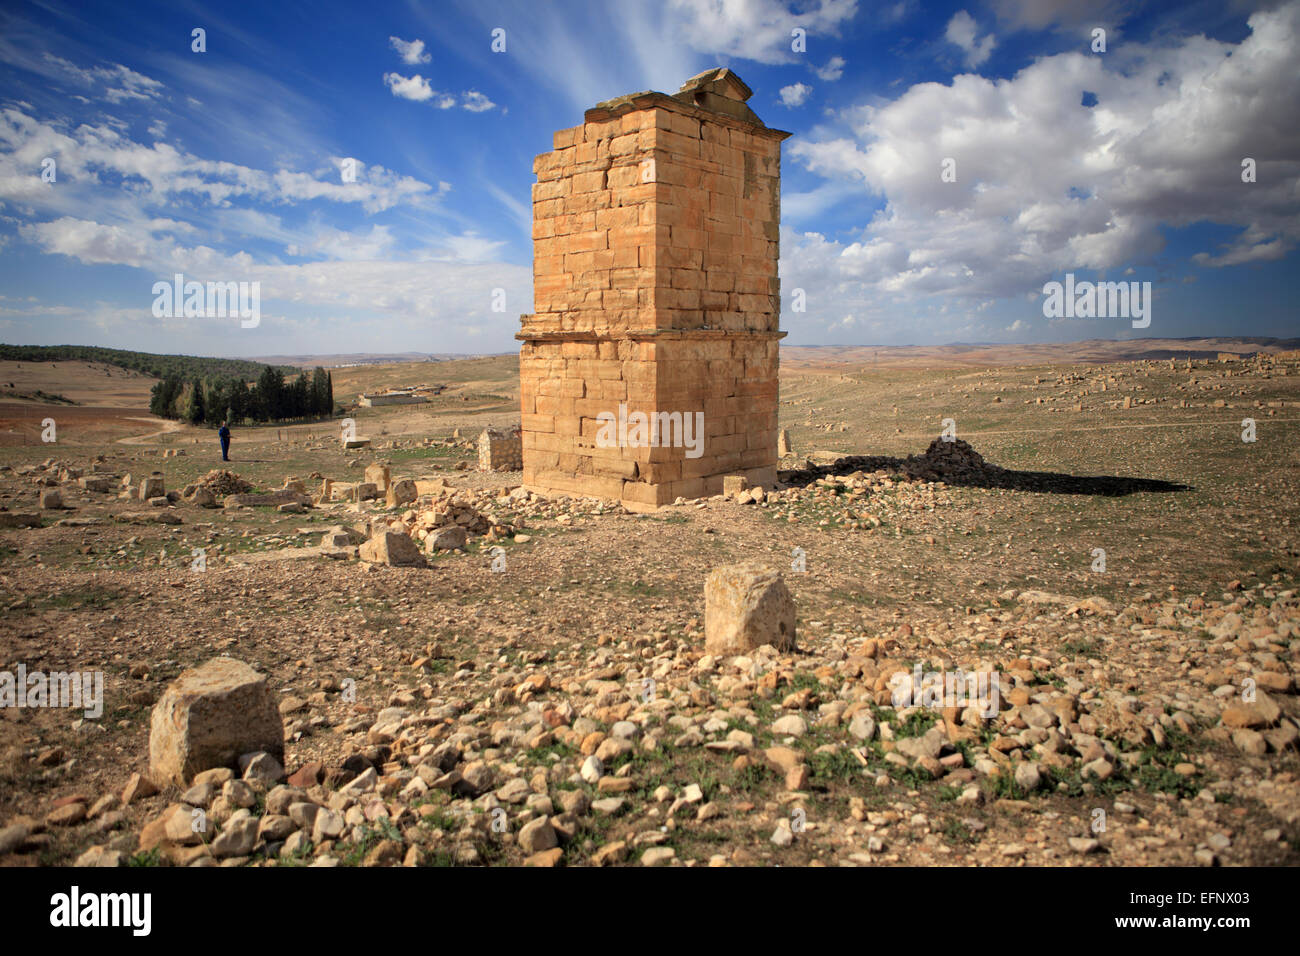 Ruins of ancient city of Madauros, M'Daourouch, Souk Ahras Province, Algeria Stock Photo